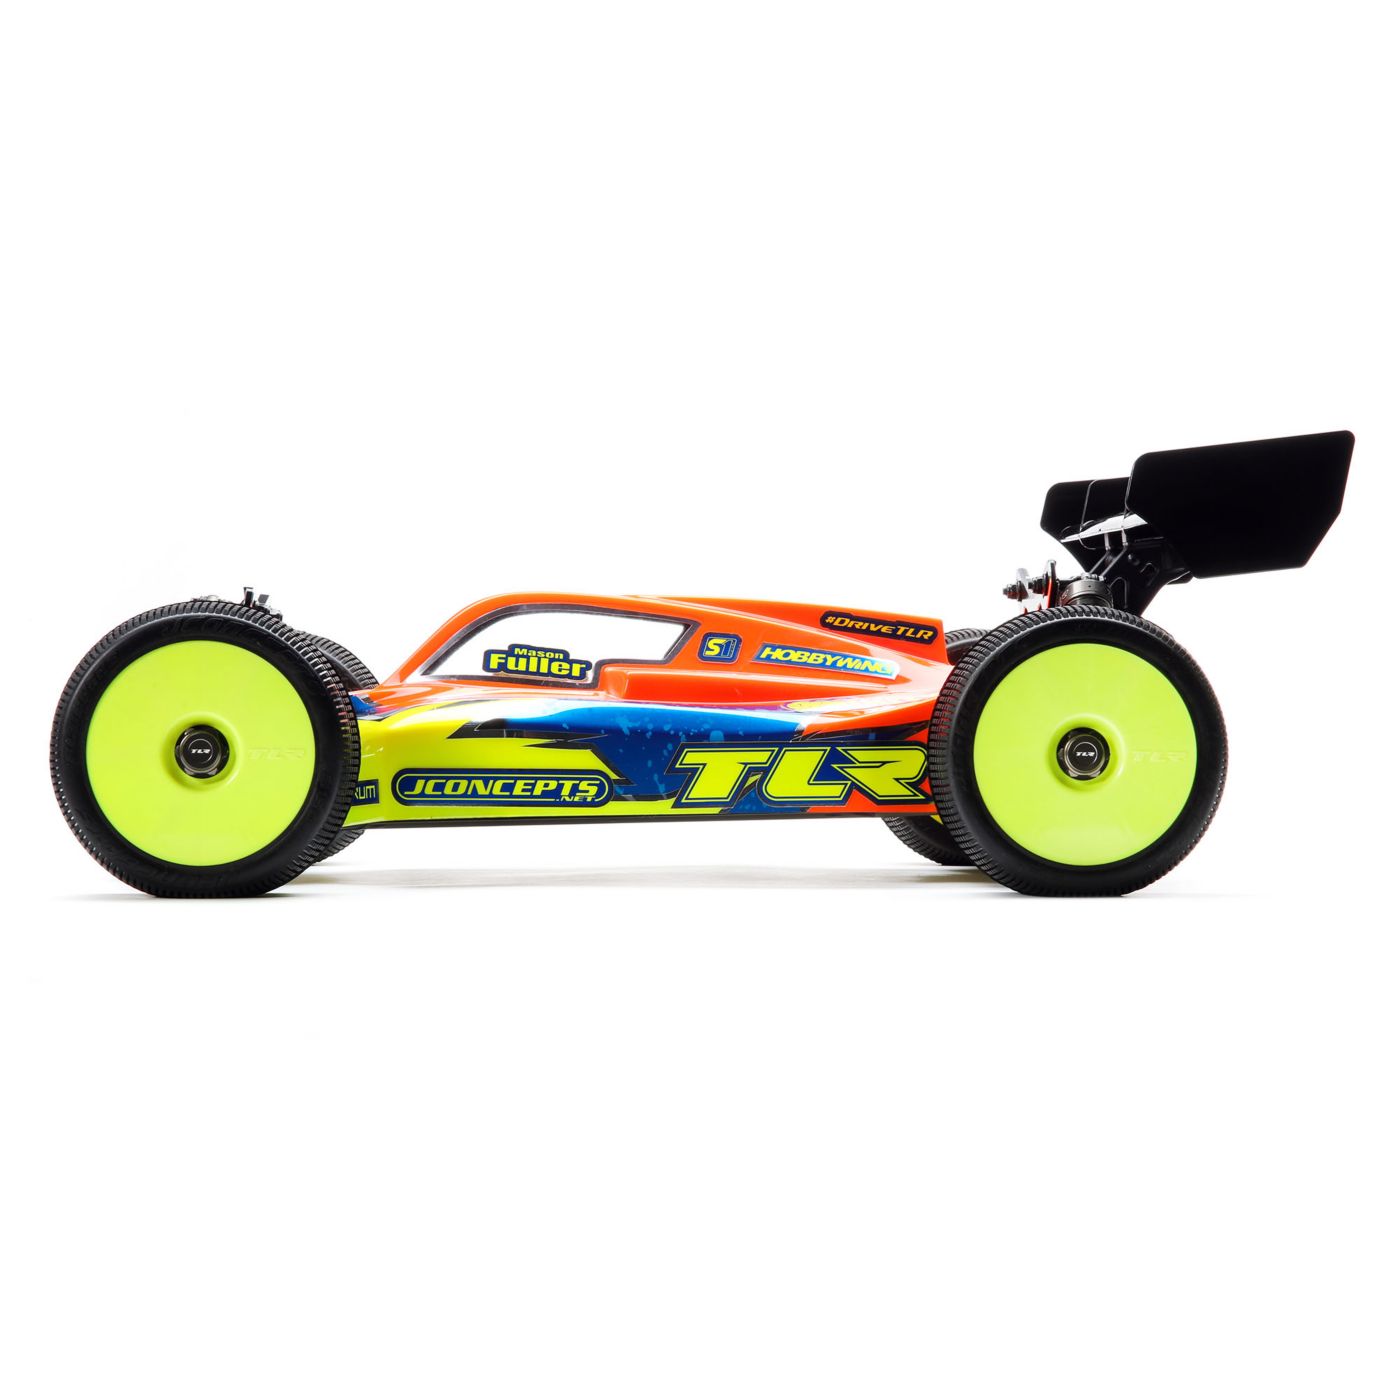 Team Losi Racing 1/8 8IGHT-XE Elite 4WD Electric Buggy Race Kit